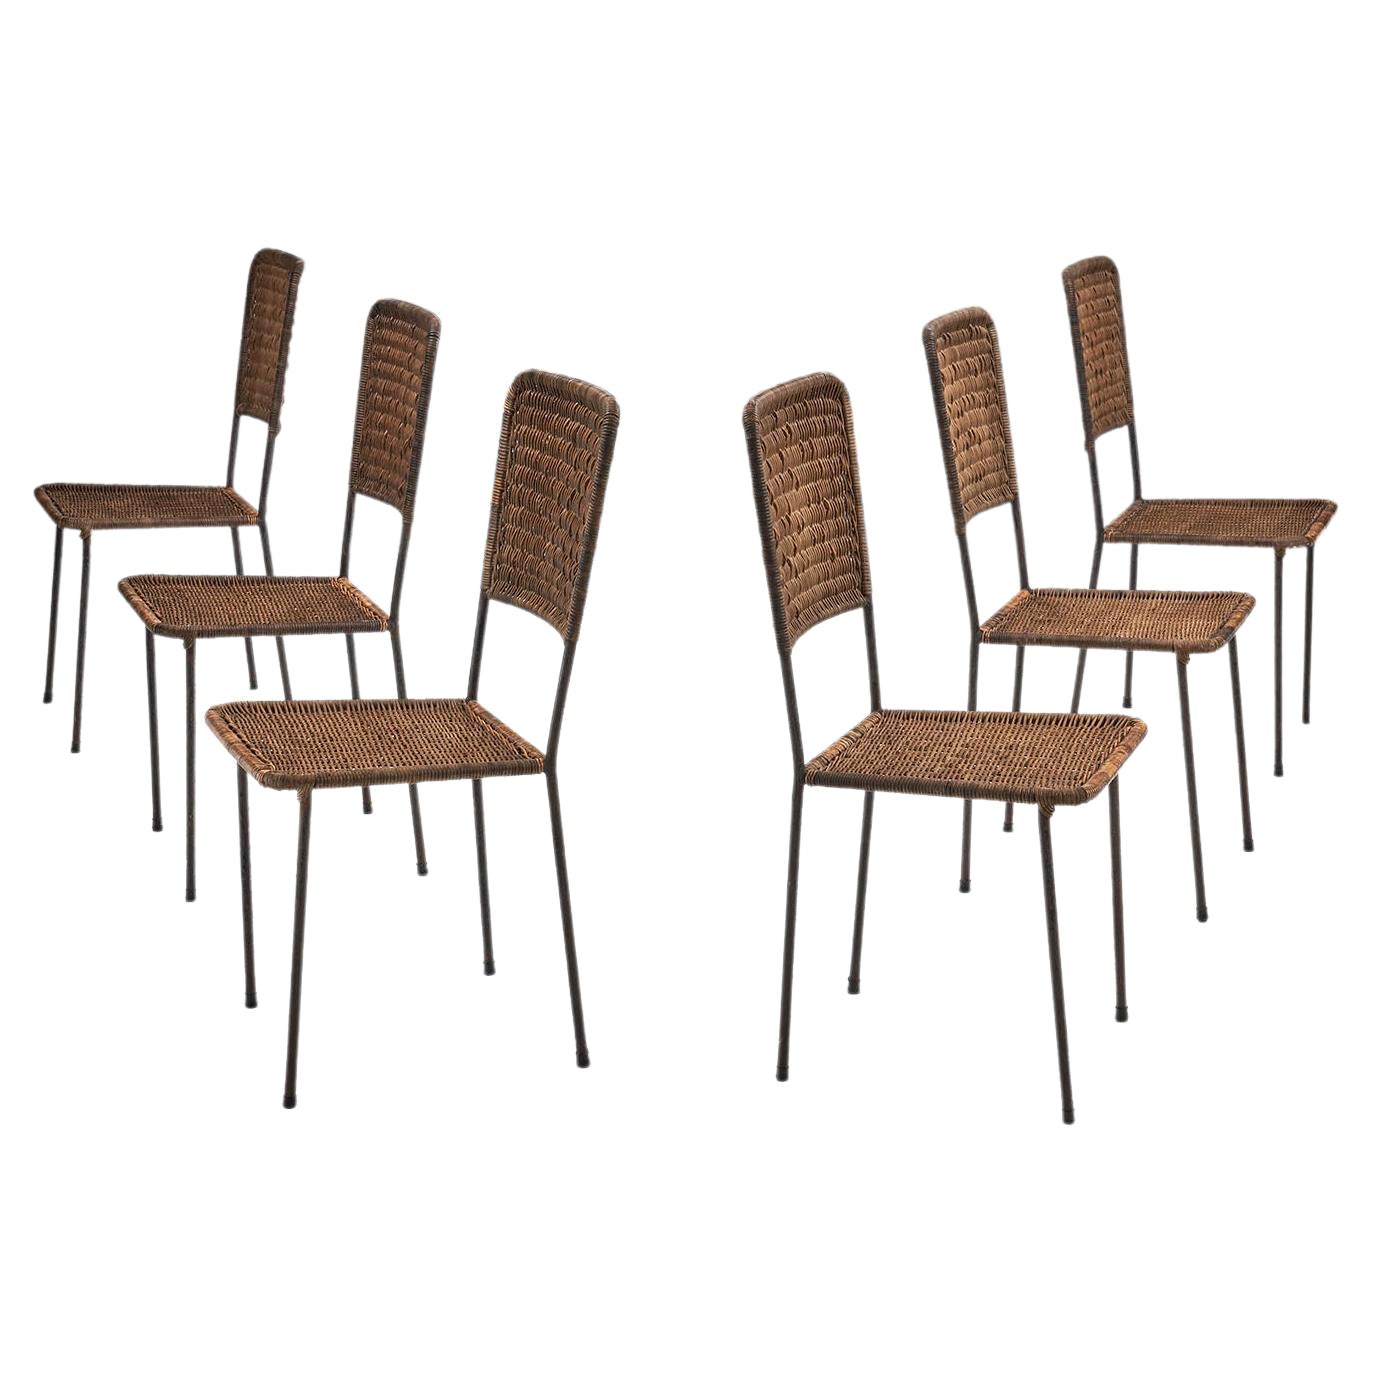 6 Iron and Rattan Chairs, Brazil, 1960s For Sale